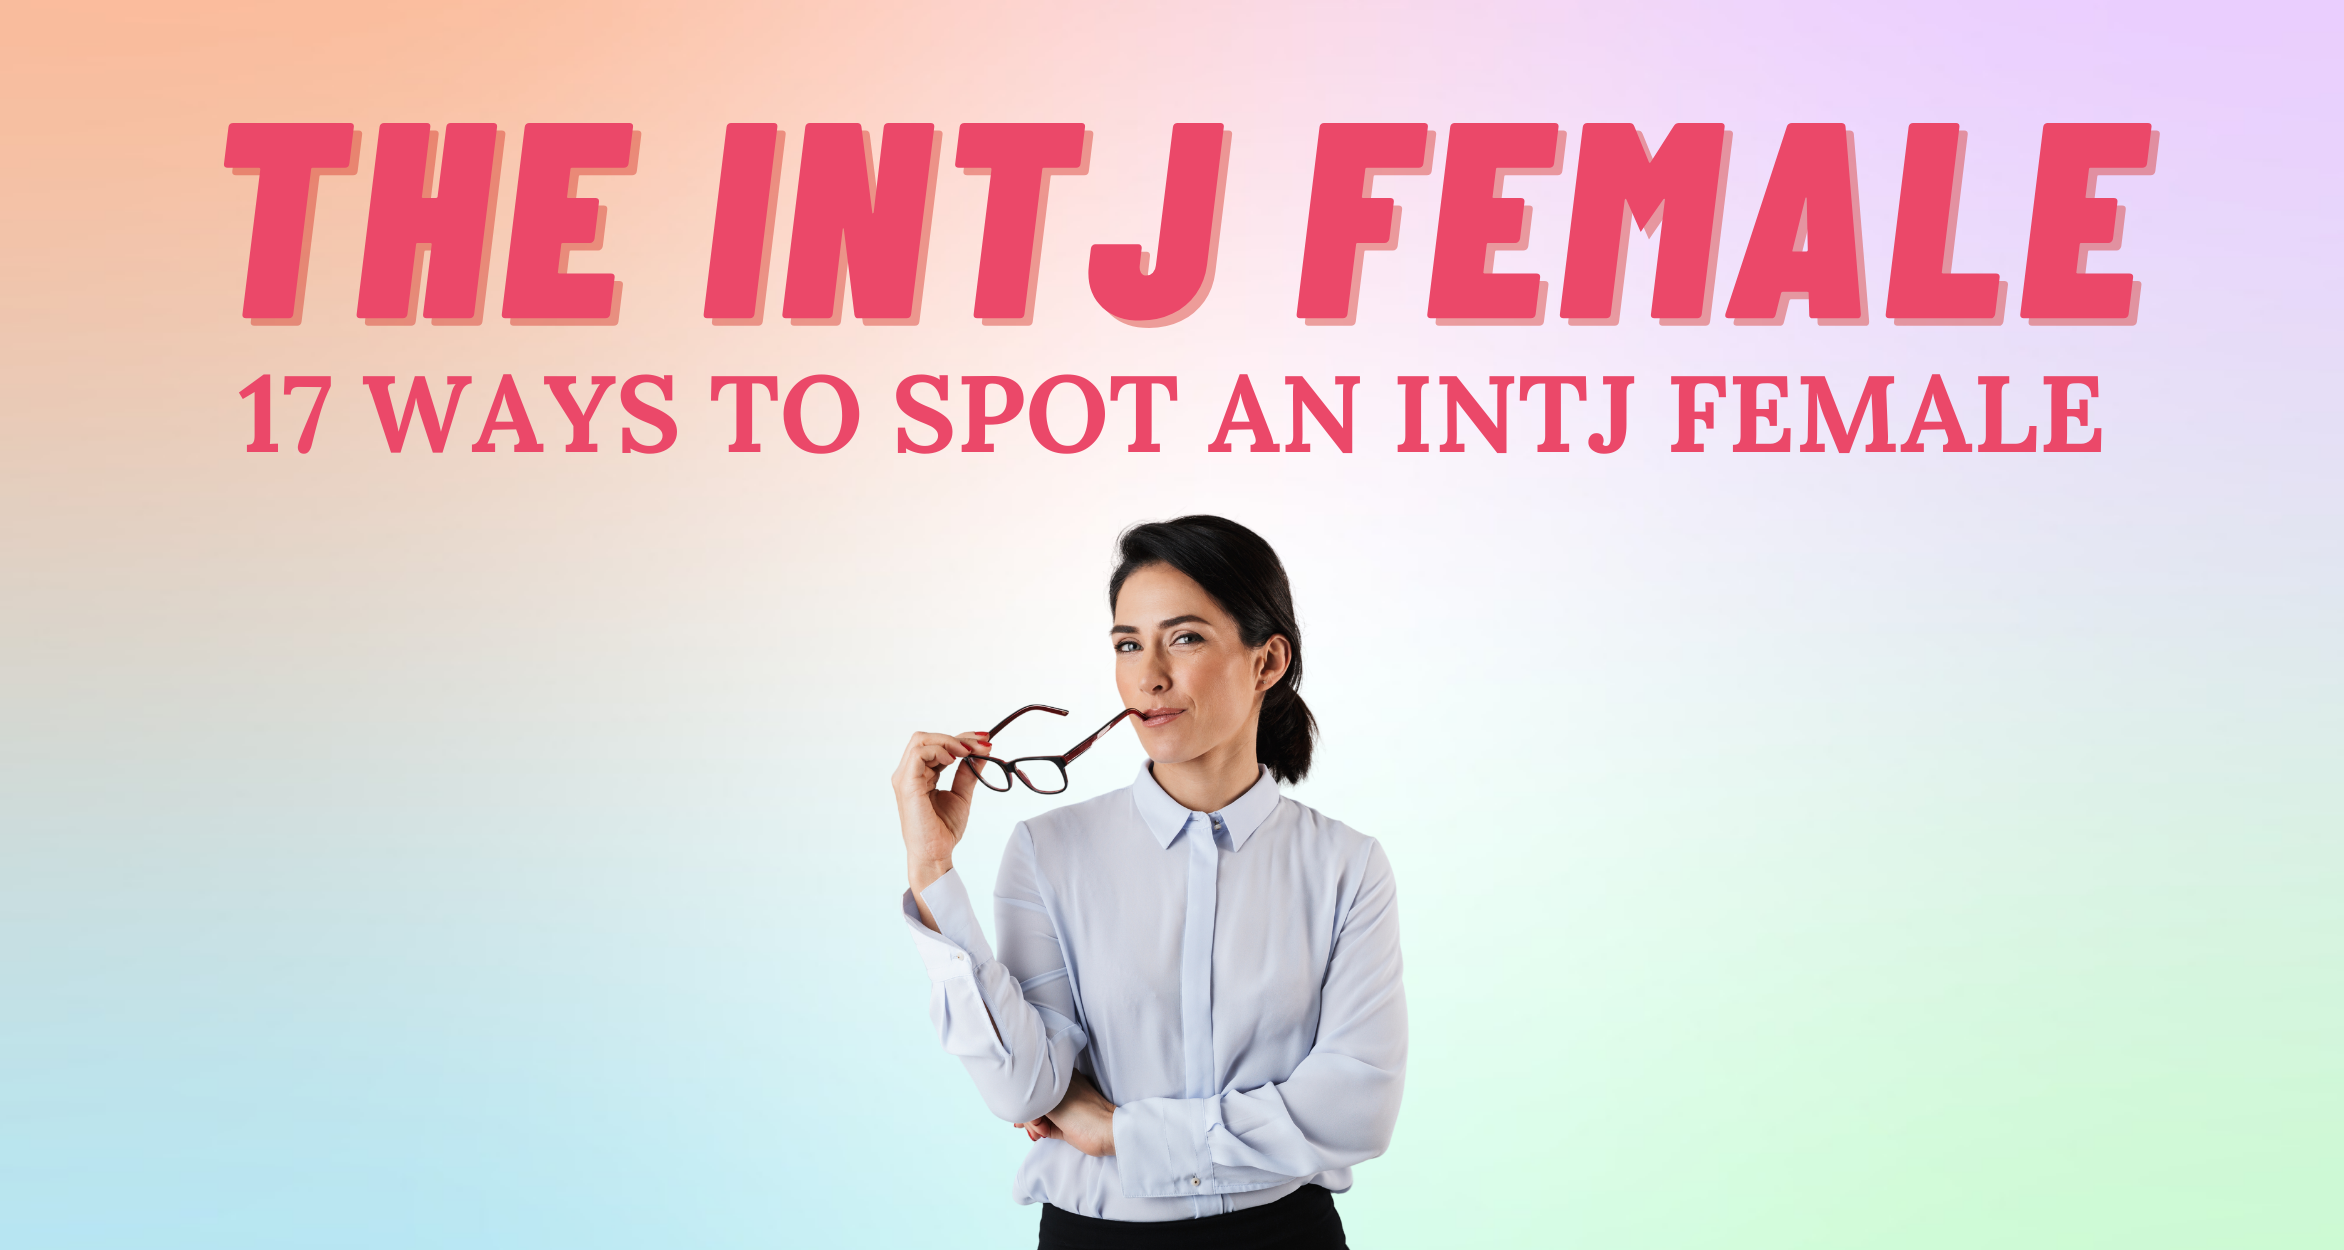 Intj Photos and Images & Pictures